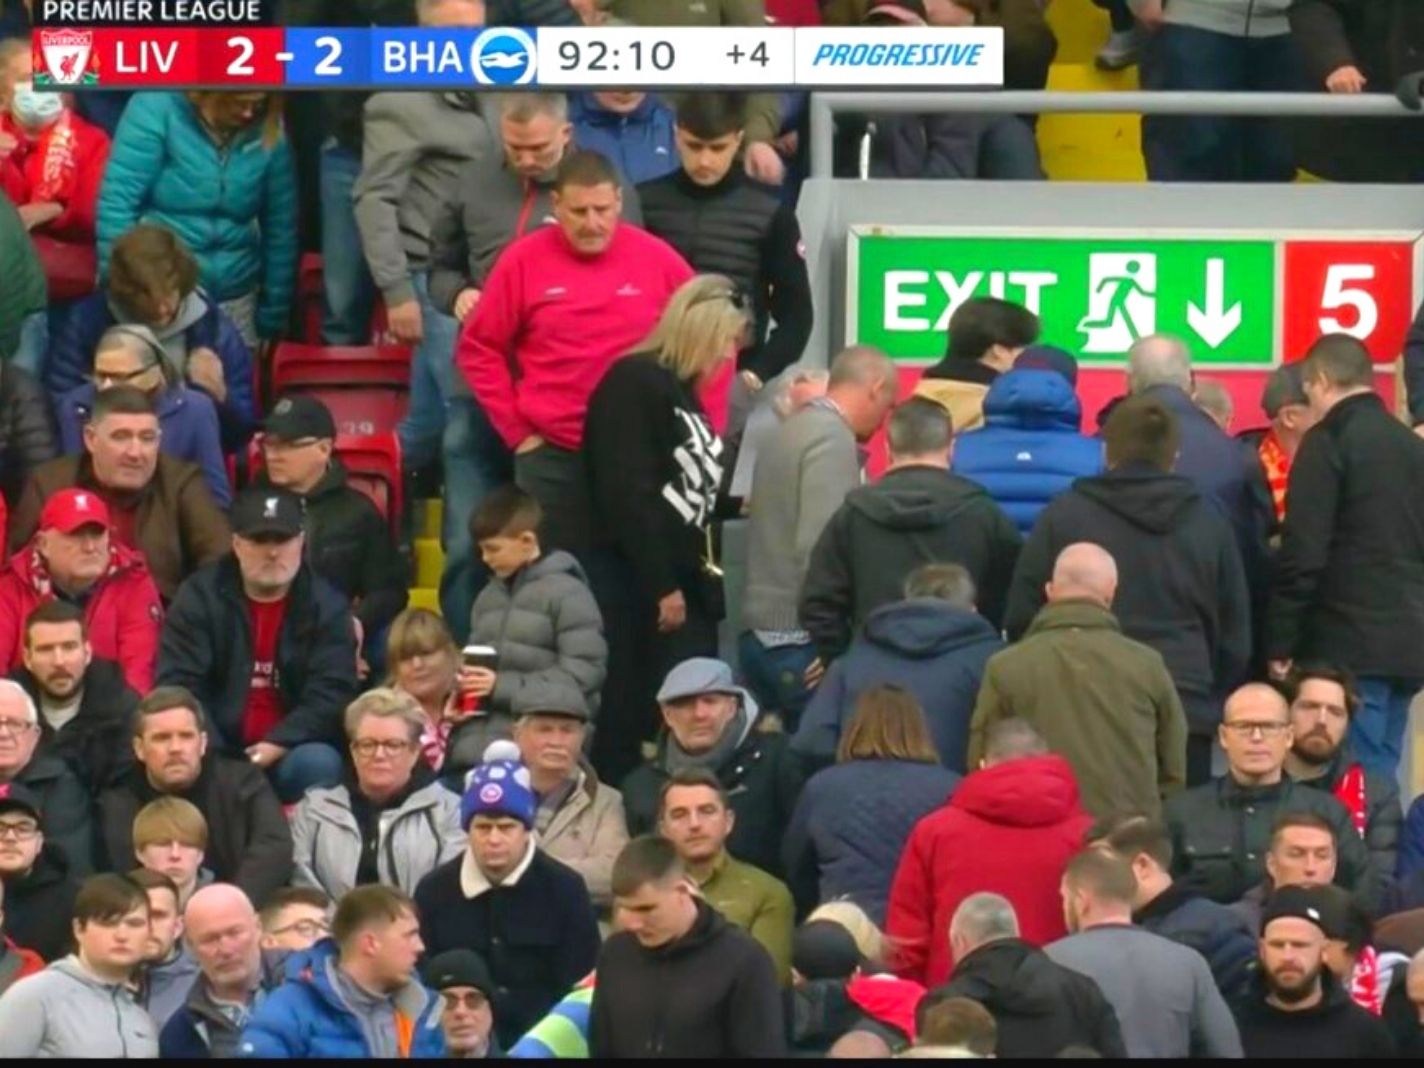 Matchgoers slammed for leaving Anfield as Liverpool chased a winner against Brighton